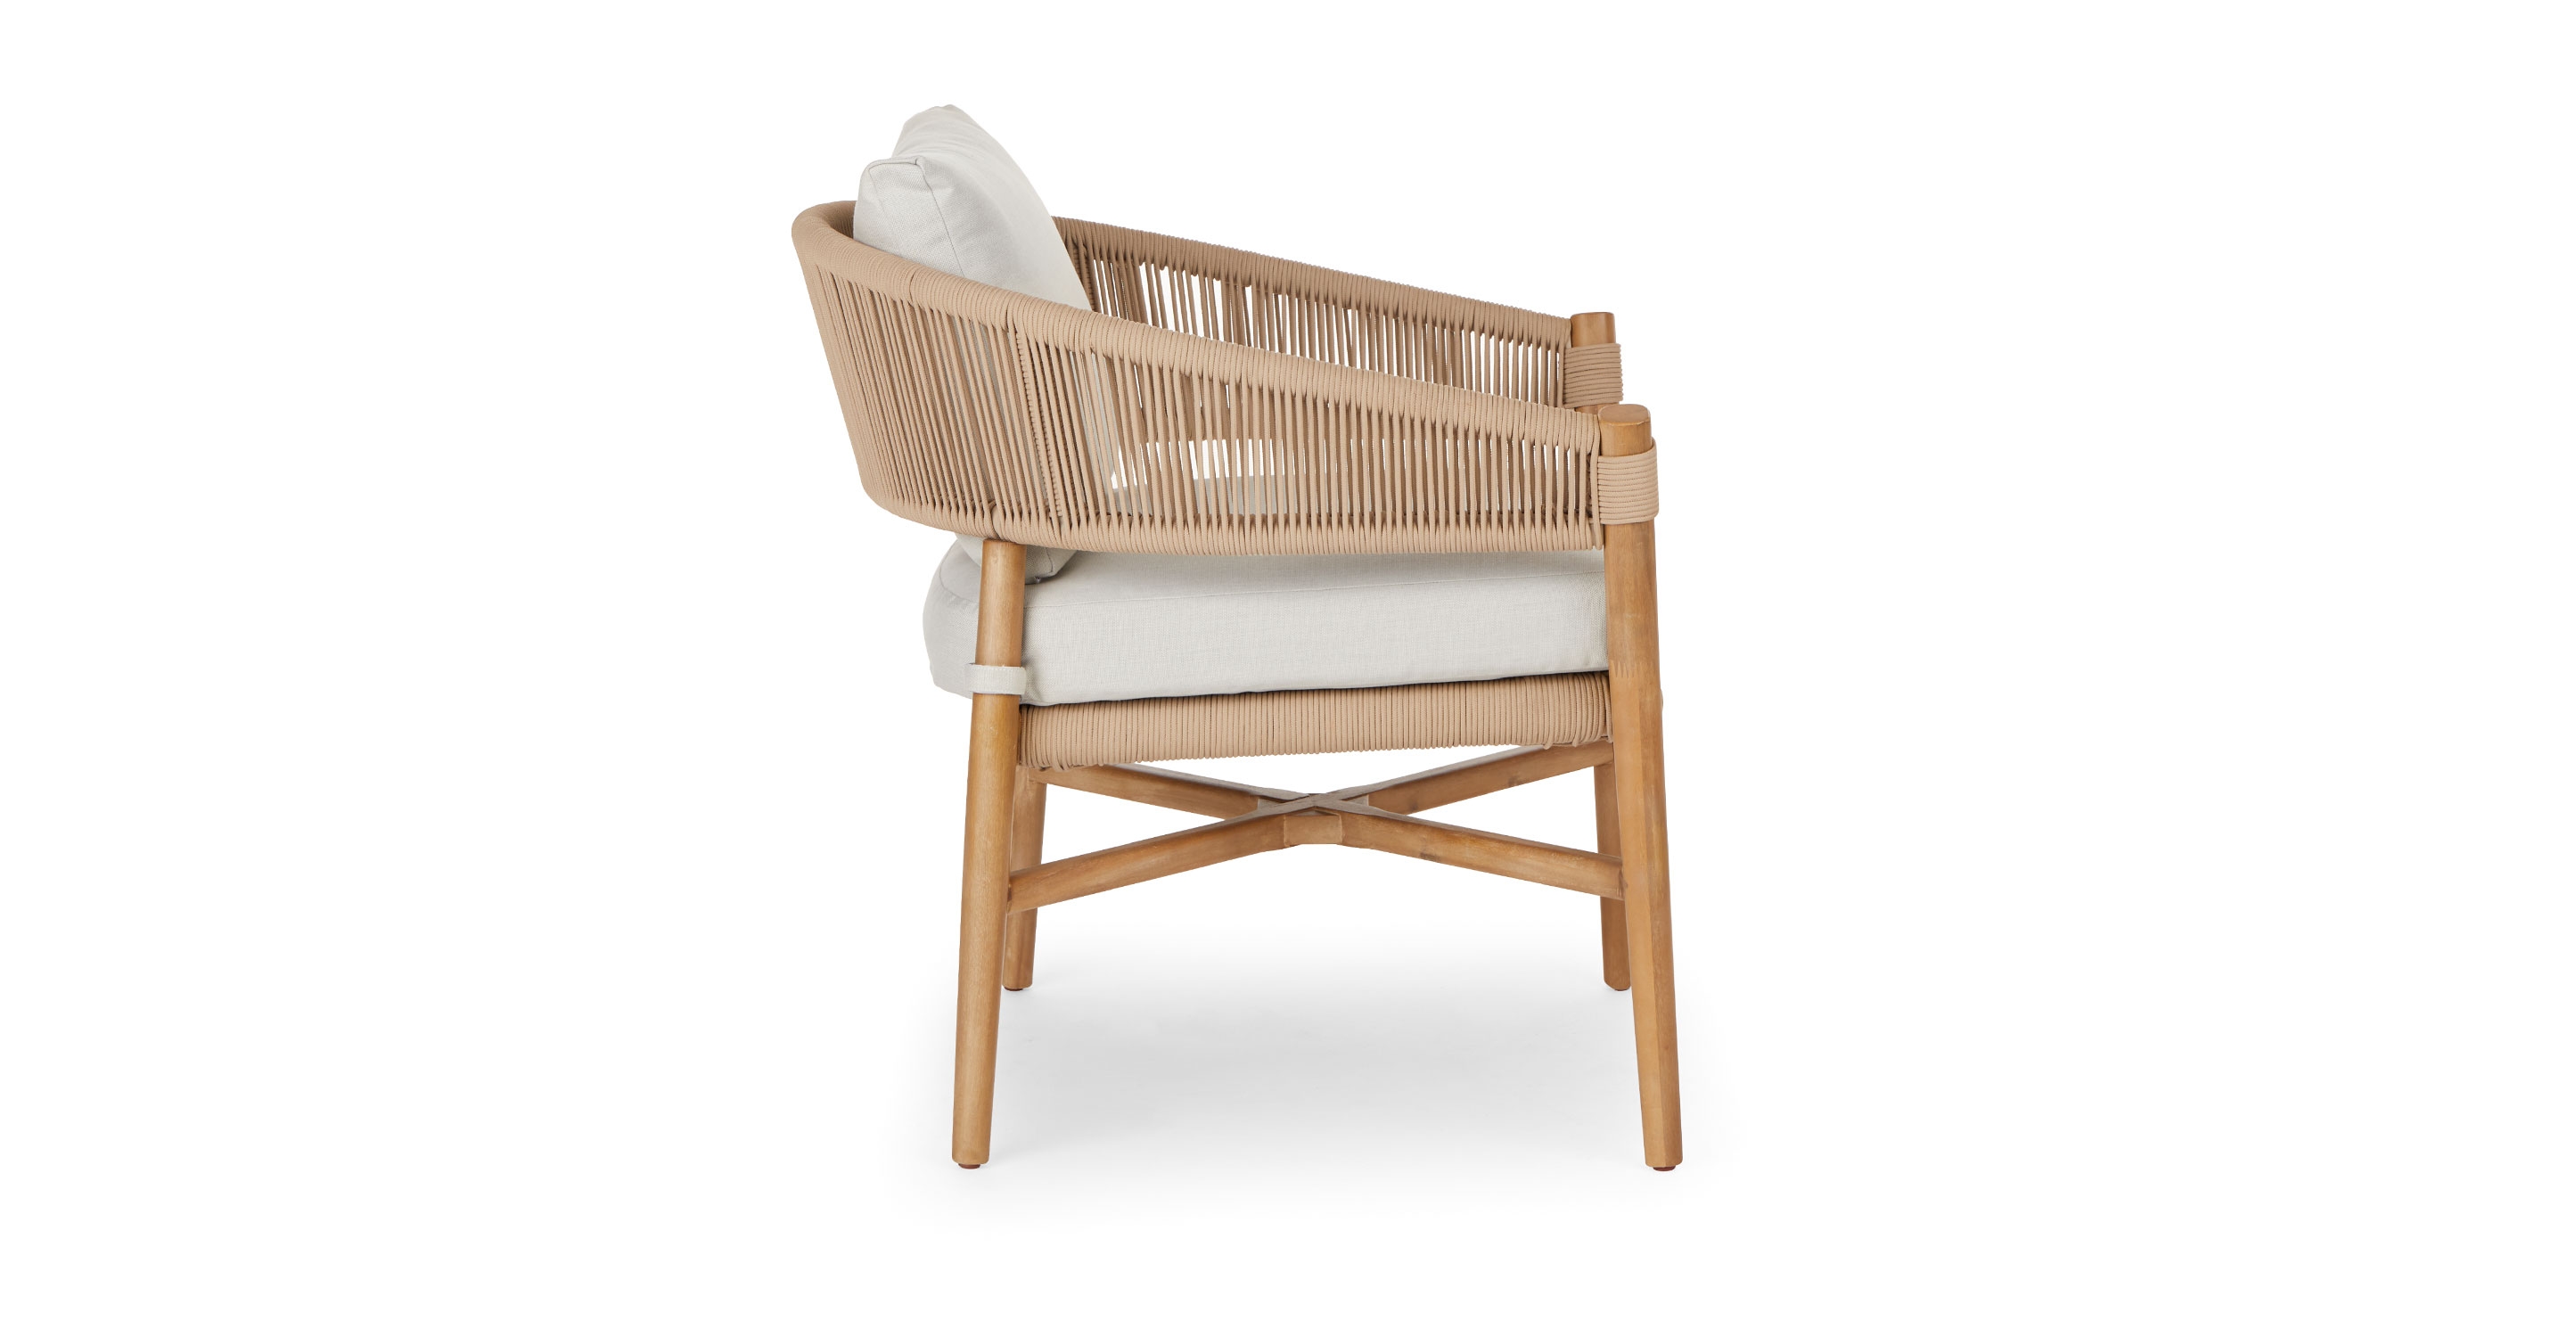 Makali Lounge Chair, Lily White - Image 3